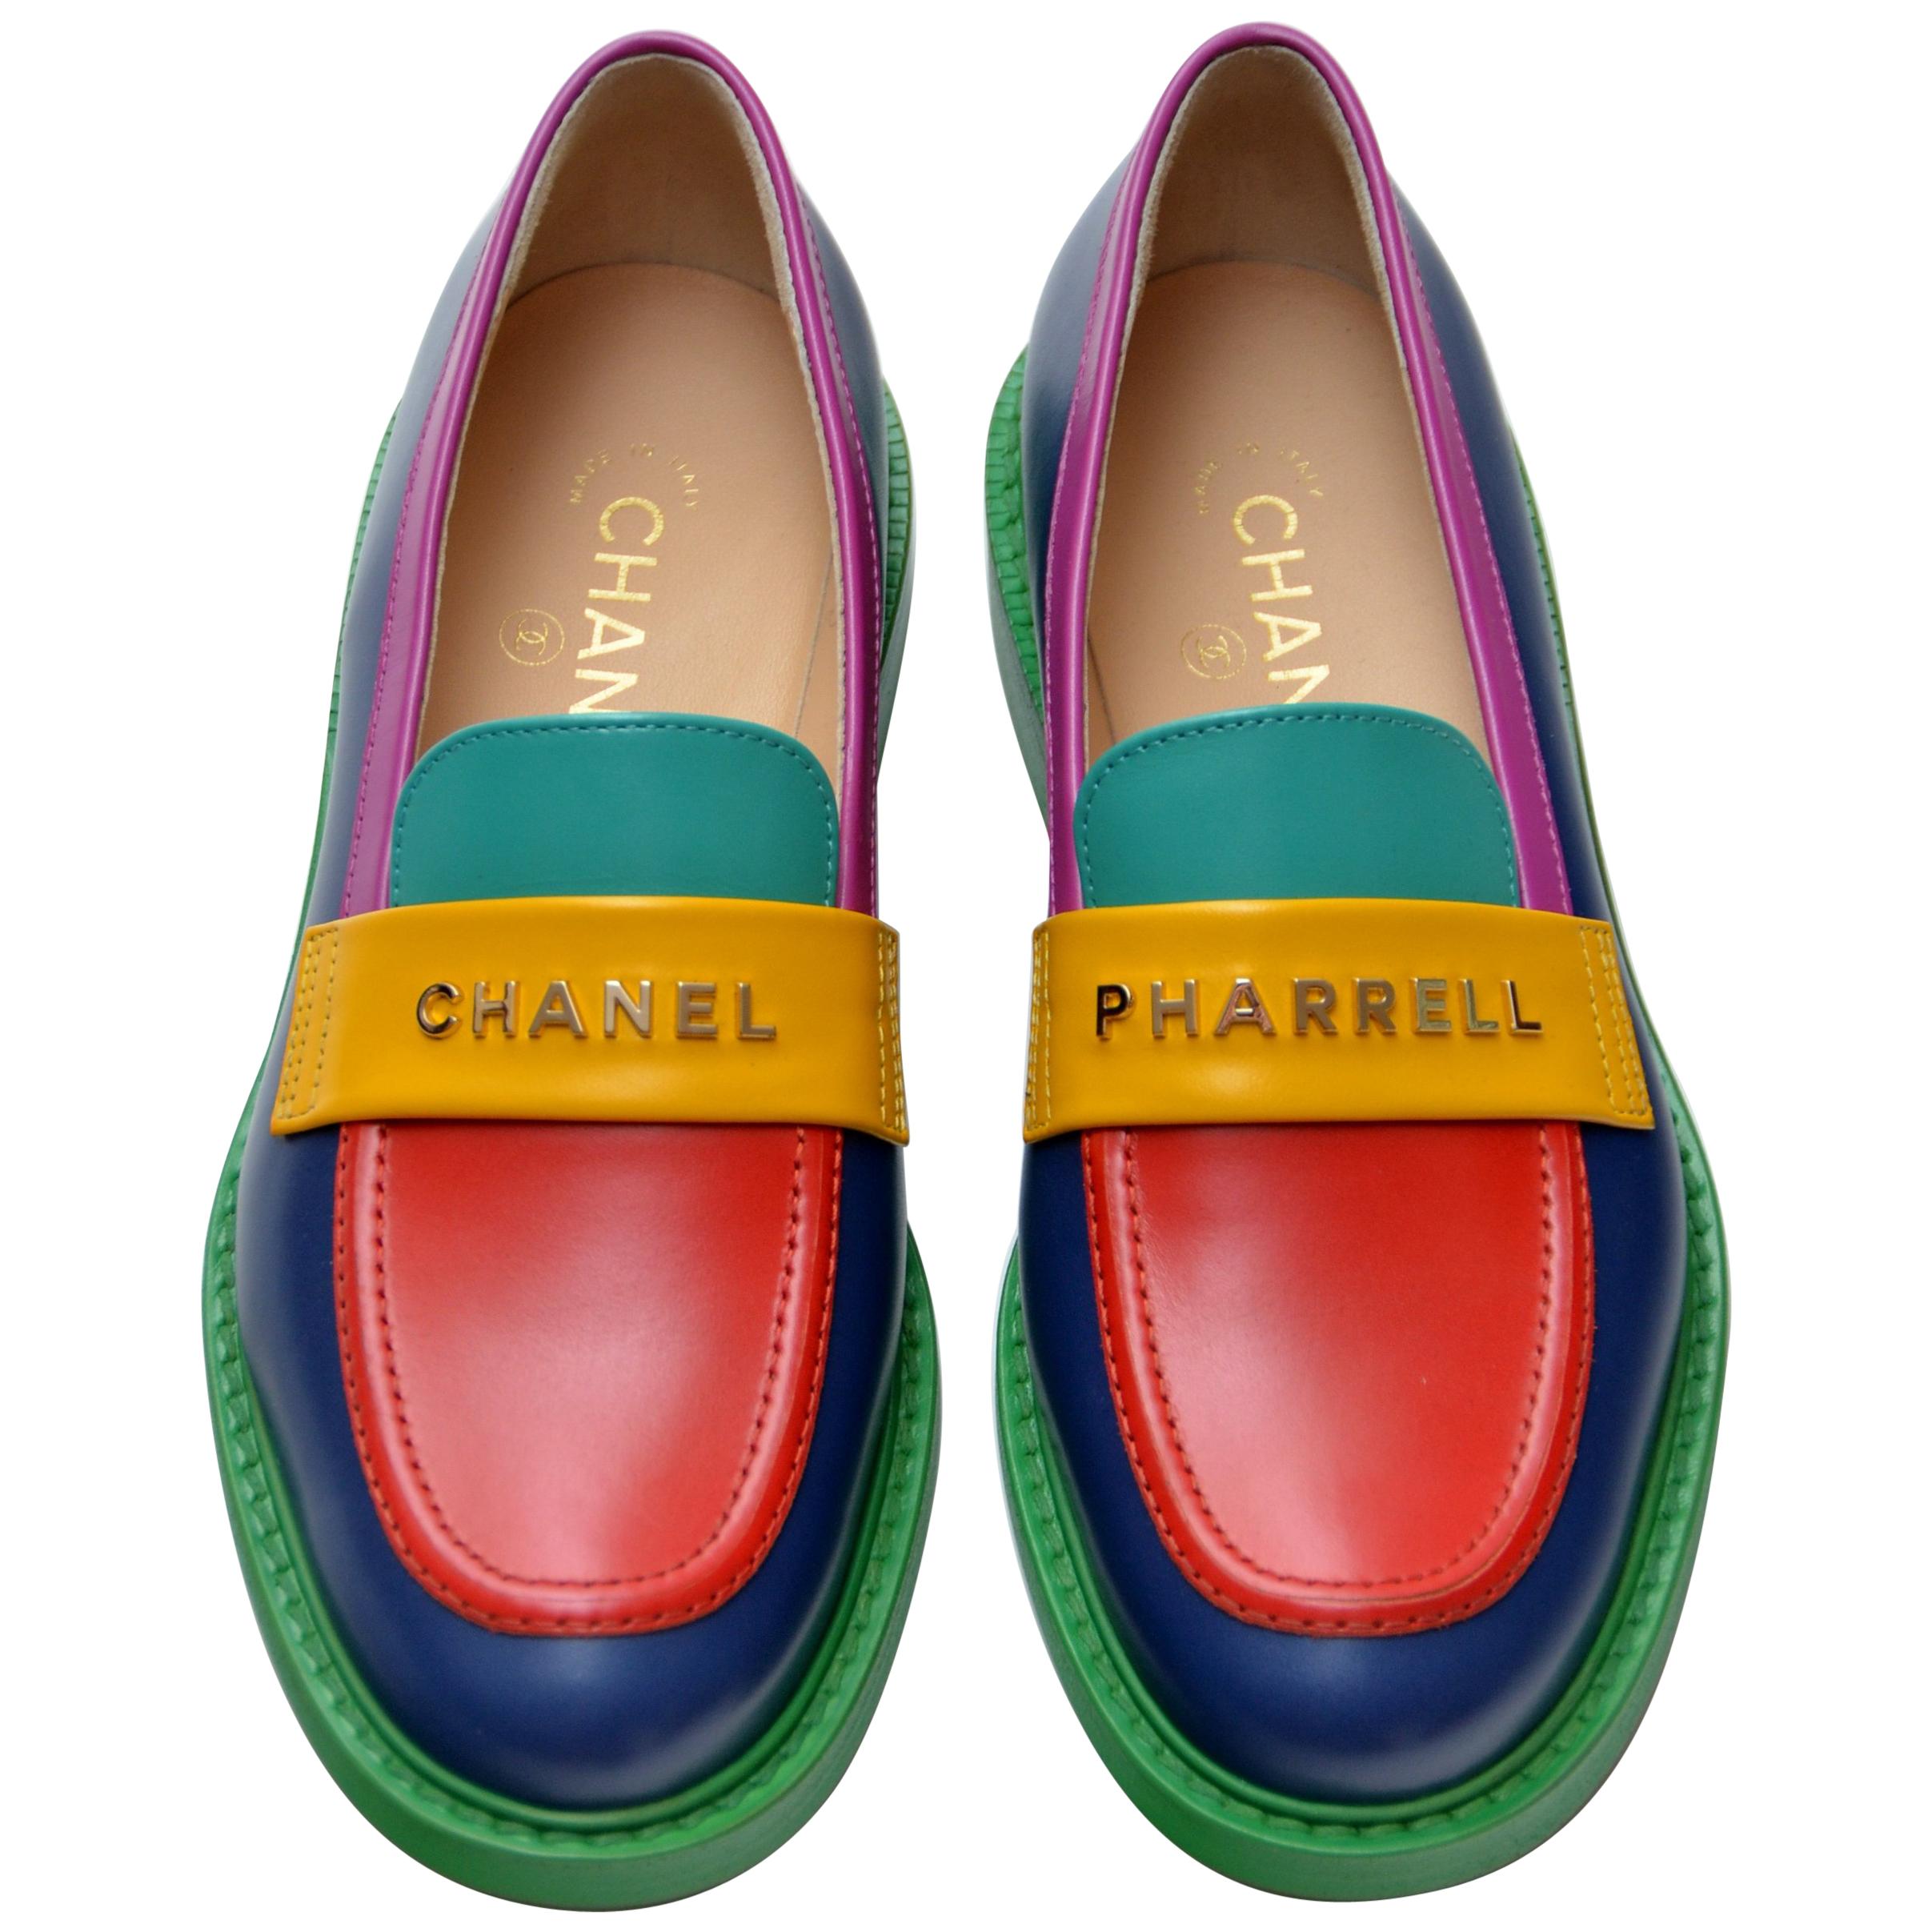 pharrell chanel capsule collection